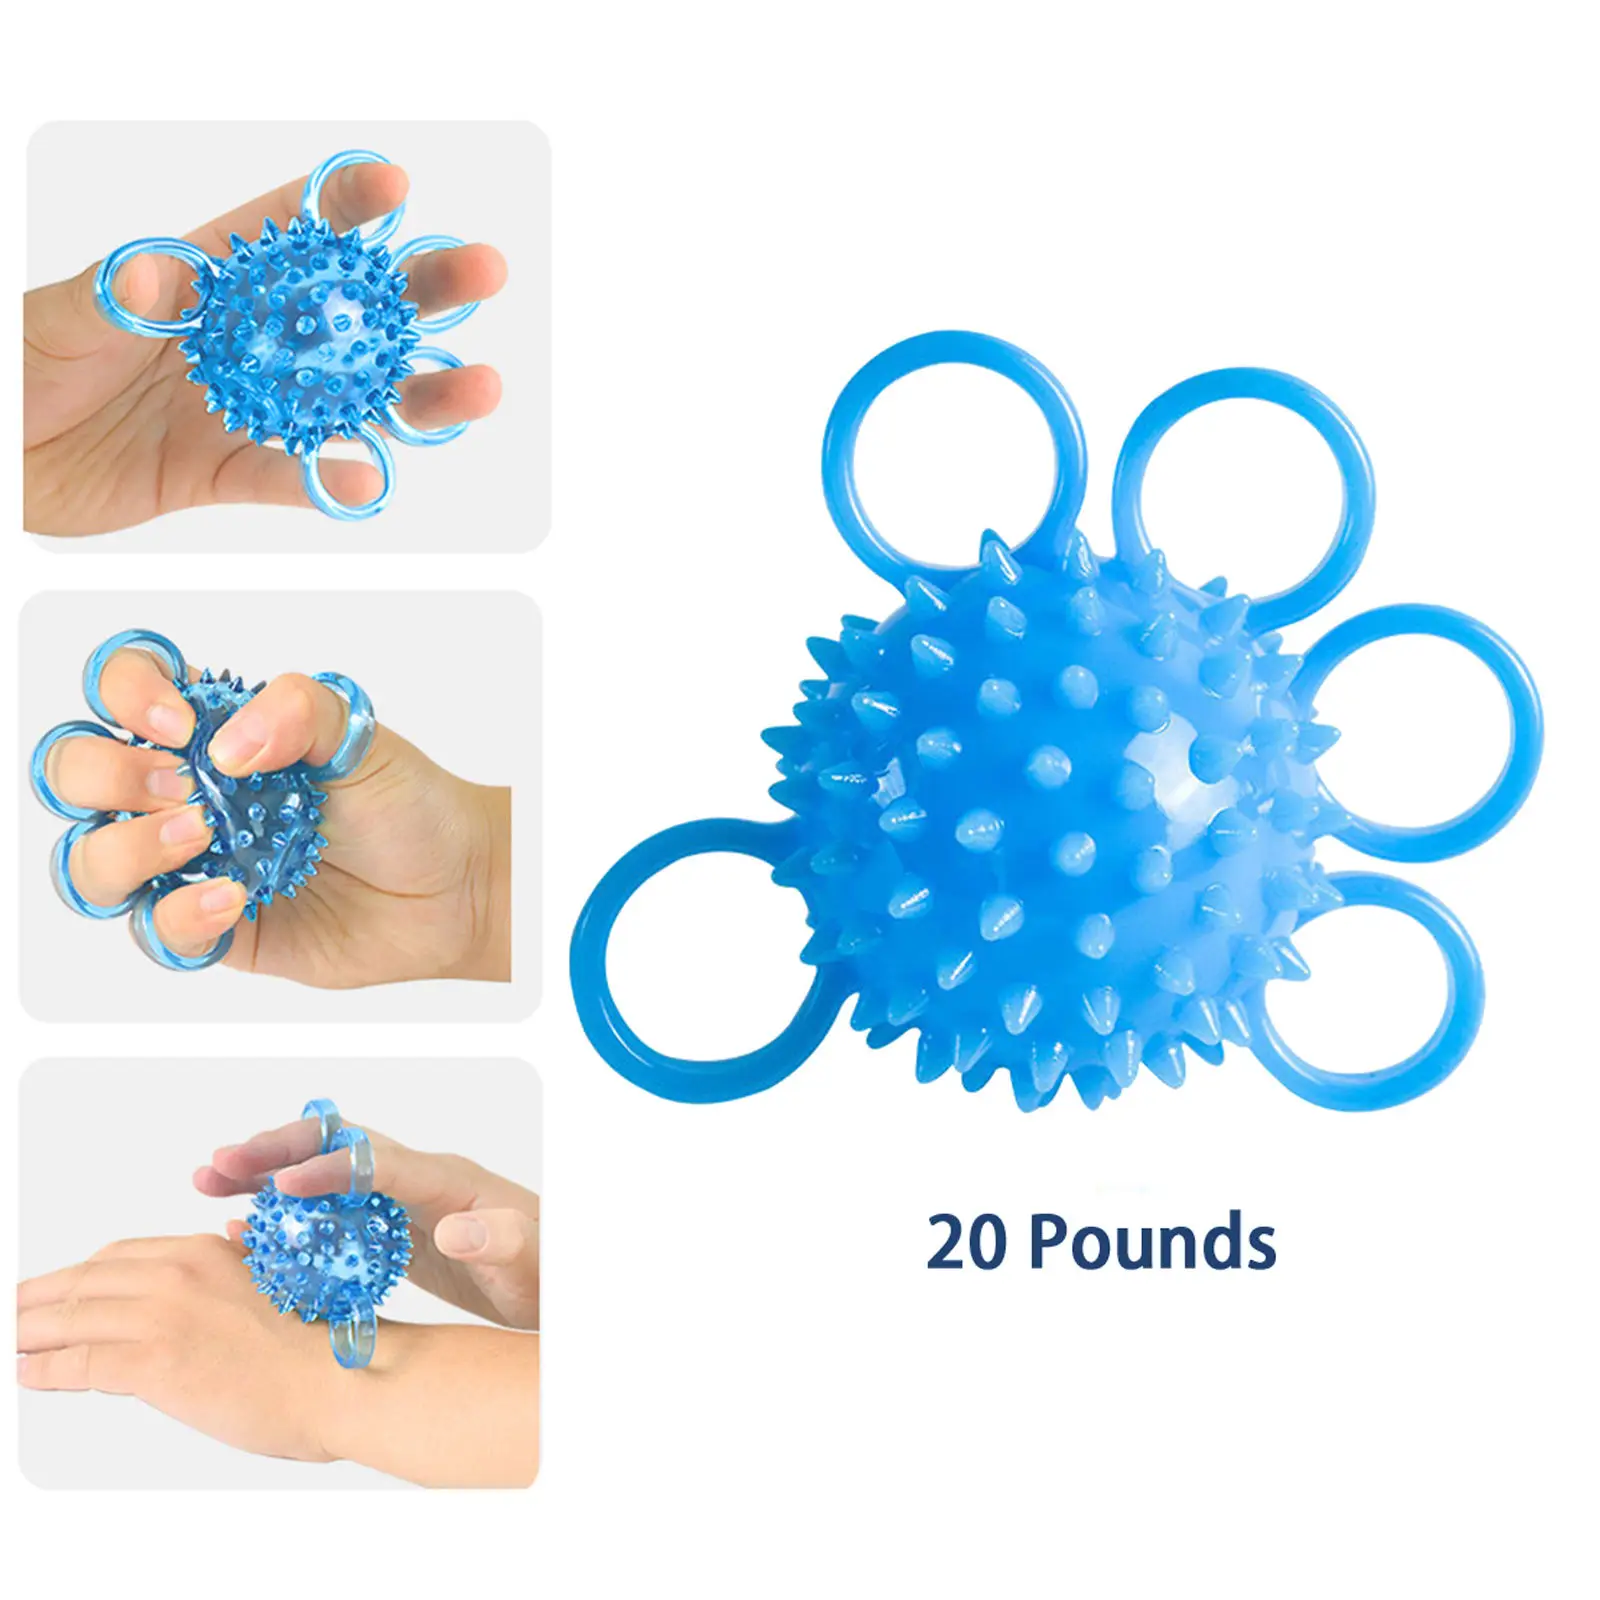 Hand Grip Ball Five Finger Strength Exerciser Force Training Relieve Recovery Stress Relief Ostomy for Hemiplegia Adults Elderly